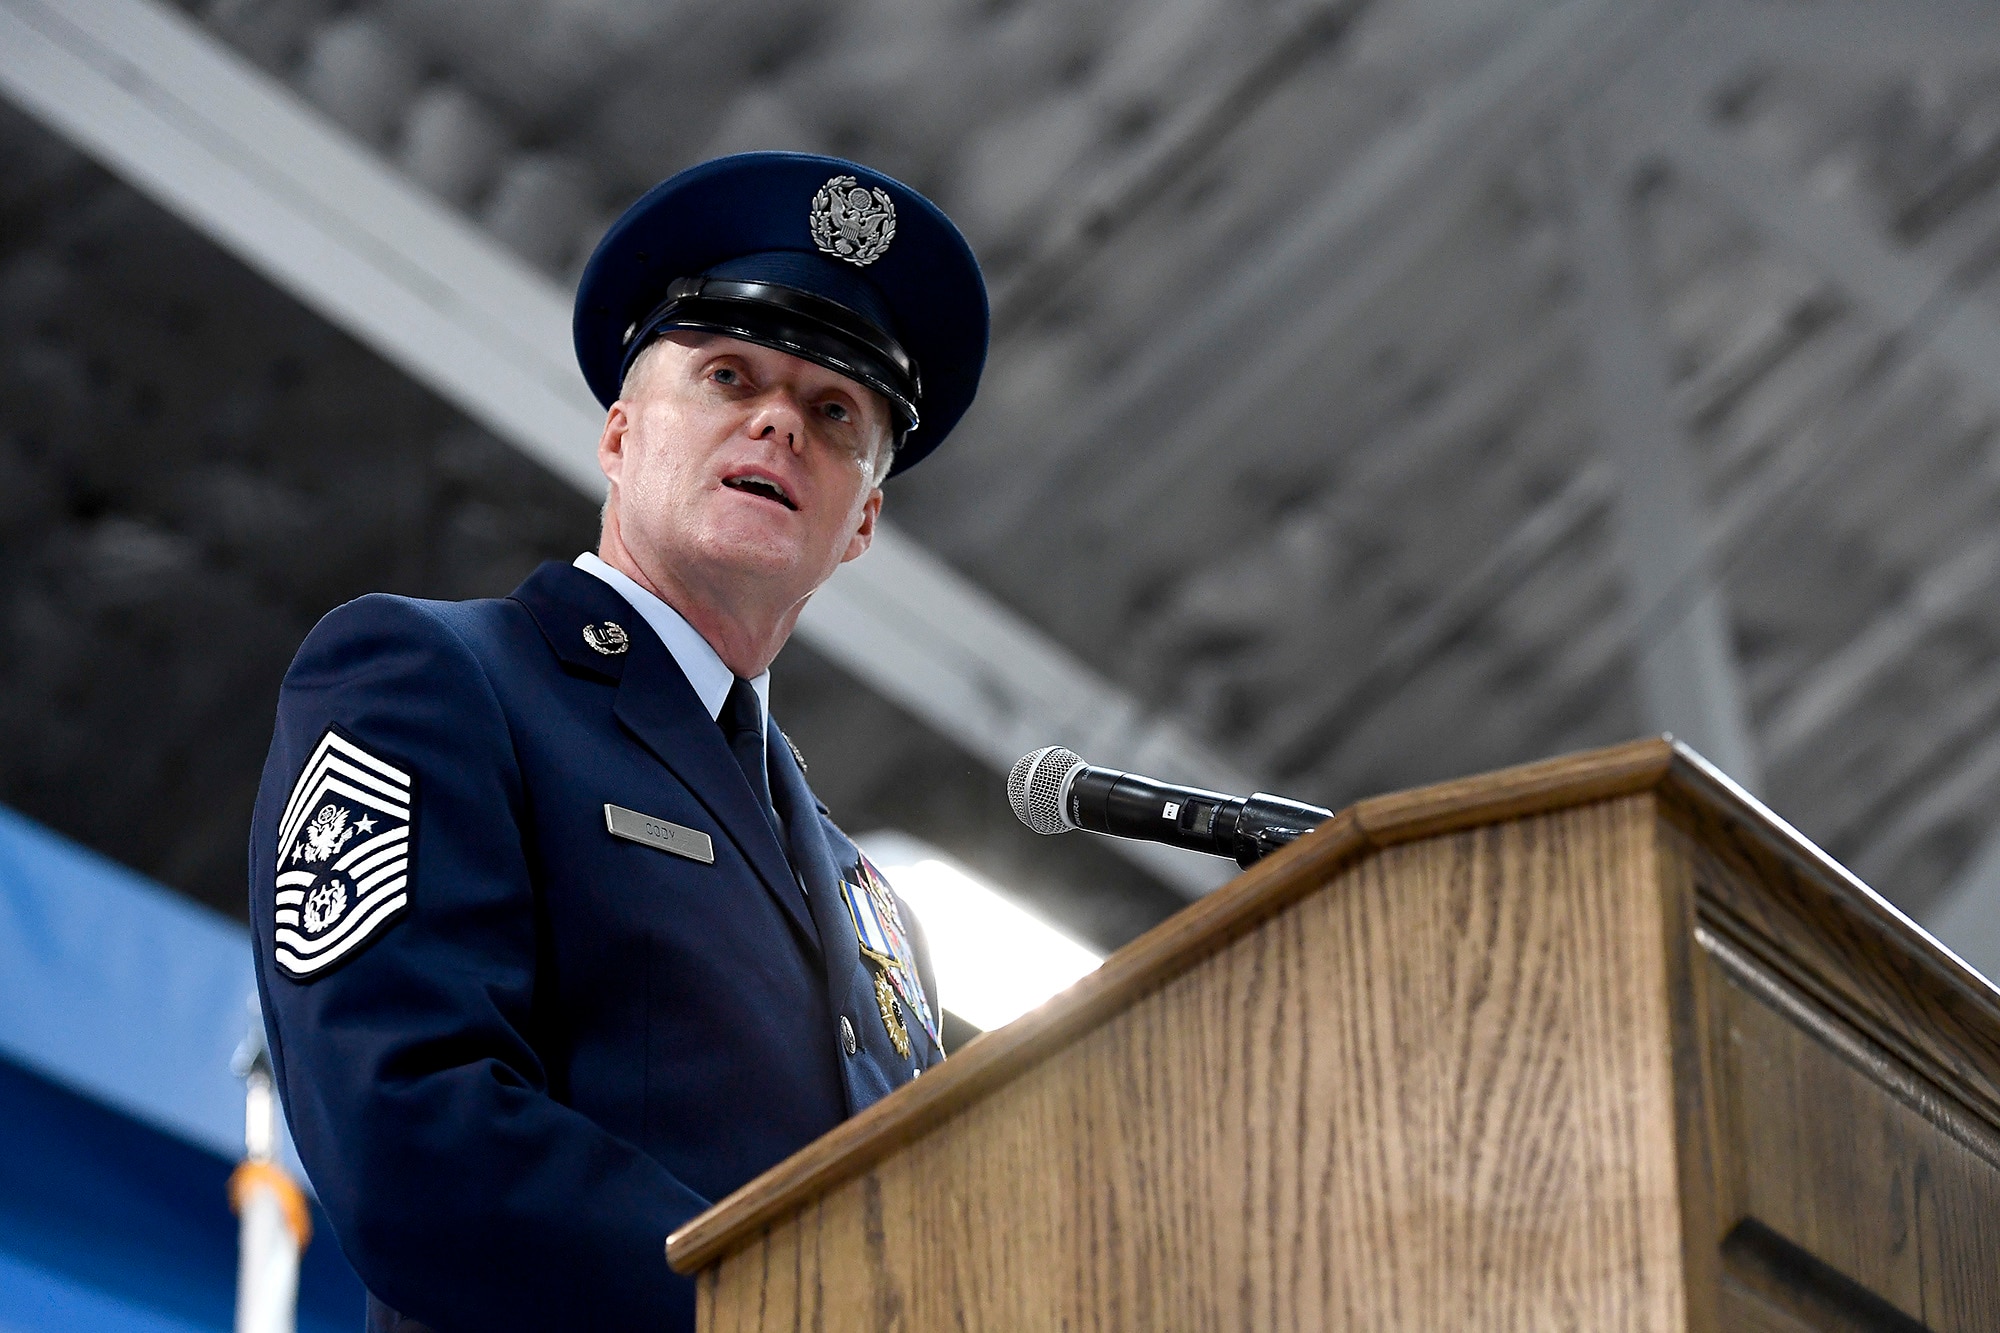 Chief Master Sgt. of the Air Force James A. Cody speaks to attendees during his retirement ceremony on Joint Base Andrews, Md., Feb. 17, 2017. Cody retires after 32 years of service and is succeeded by Chief Master Sgt. of the Air Force Kaleth O. Wright, the 18th Airman to hold this position. (U.S. Air Force photo/Scott M. Ash)